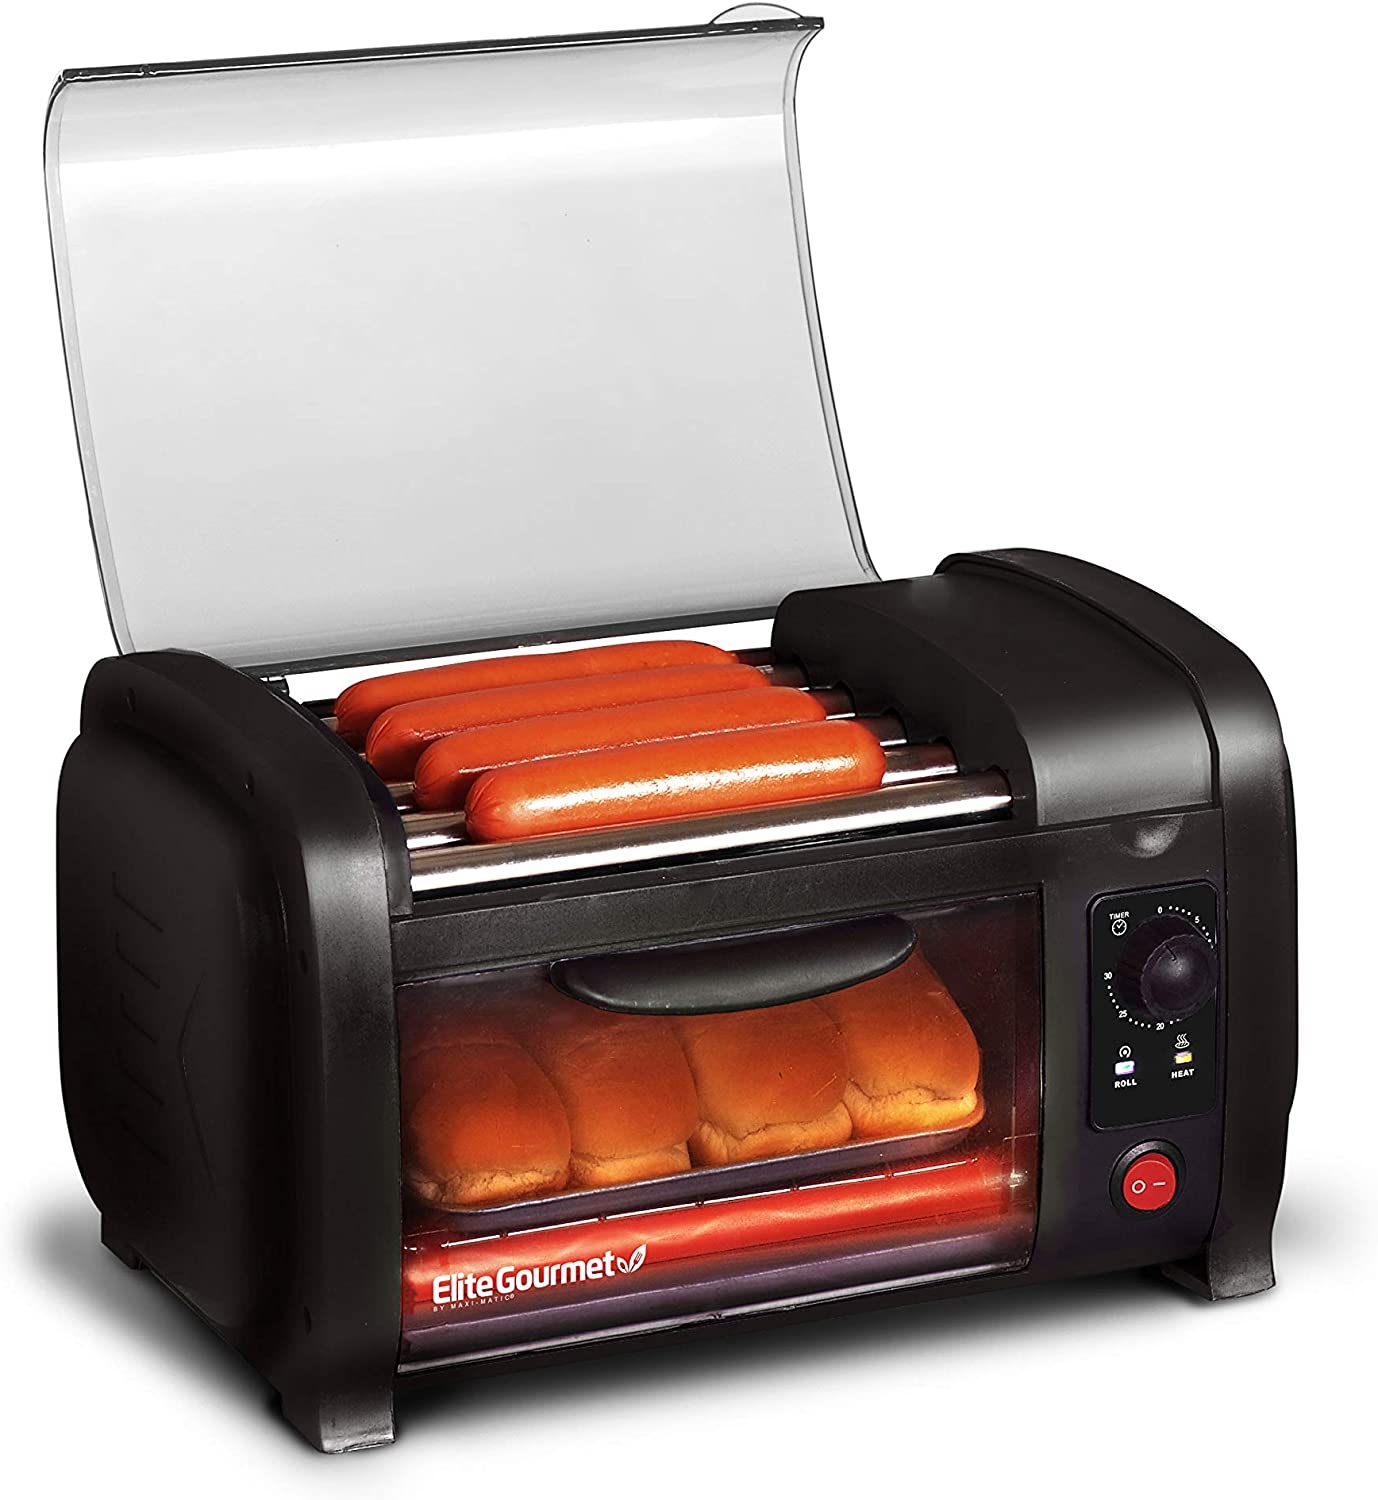 Elite Cuisine EHD-051B Hot Dog Toaster Oven, 30-Min Timer, Stainless Steel Heat Rollers Bake & Crumb Tray, World Series